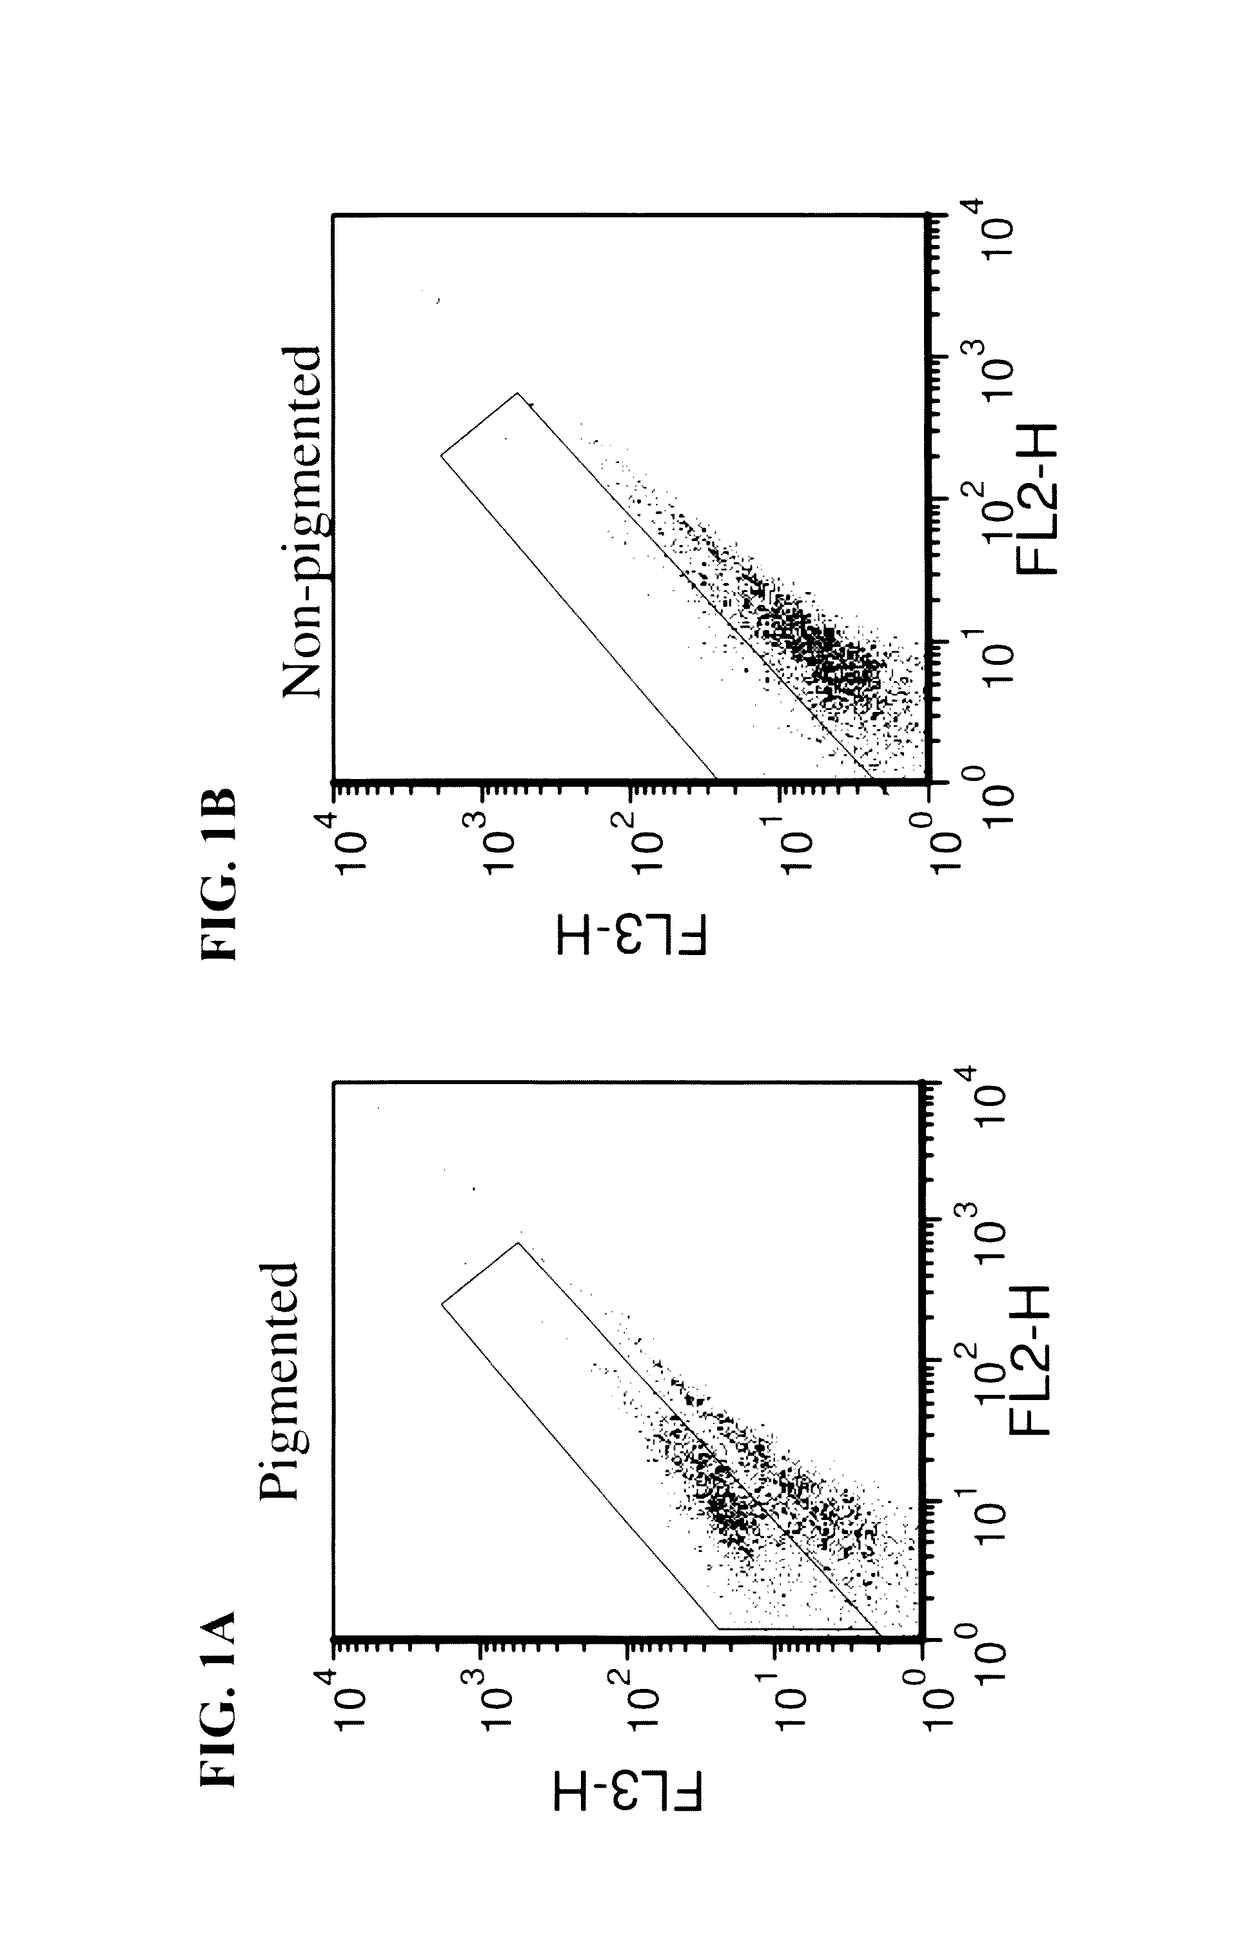 Methods of selecting retinal pigmented epithelial cells